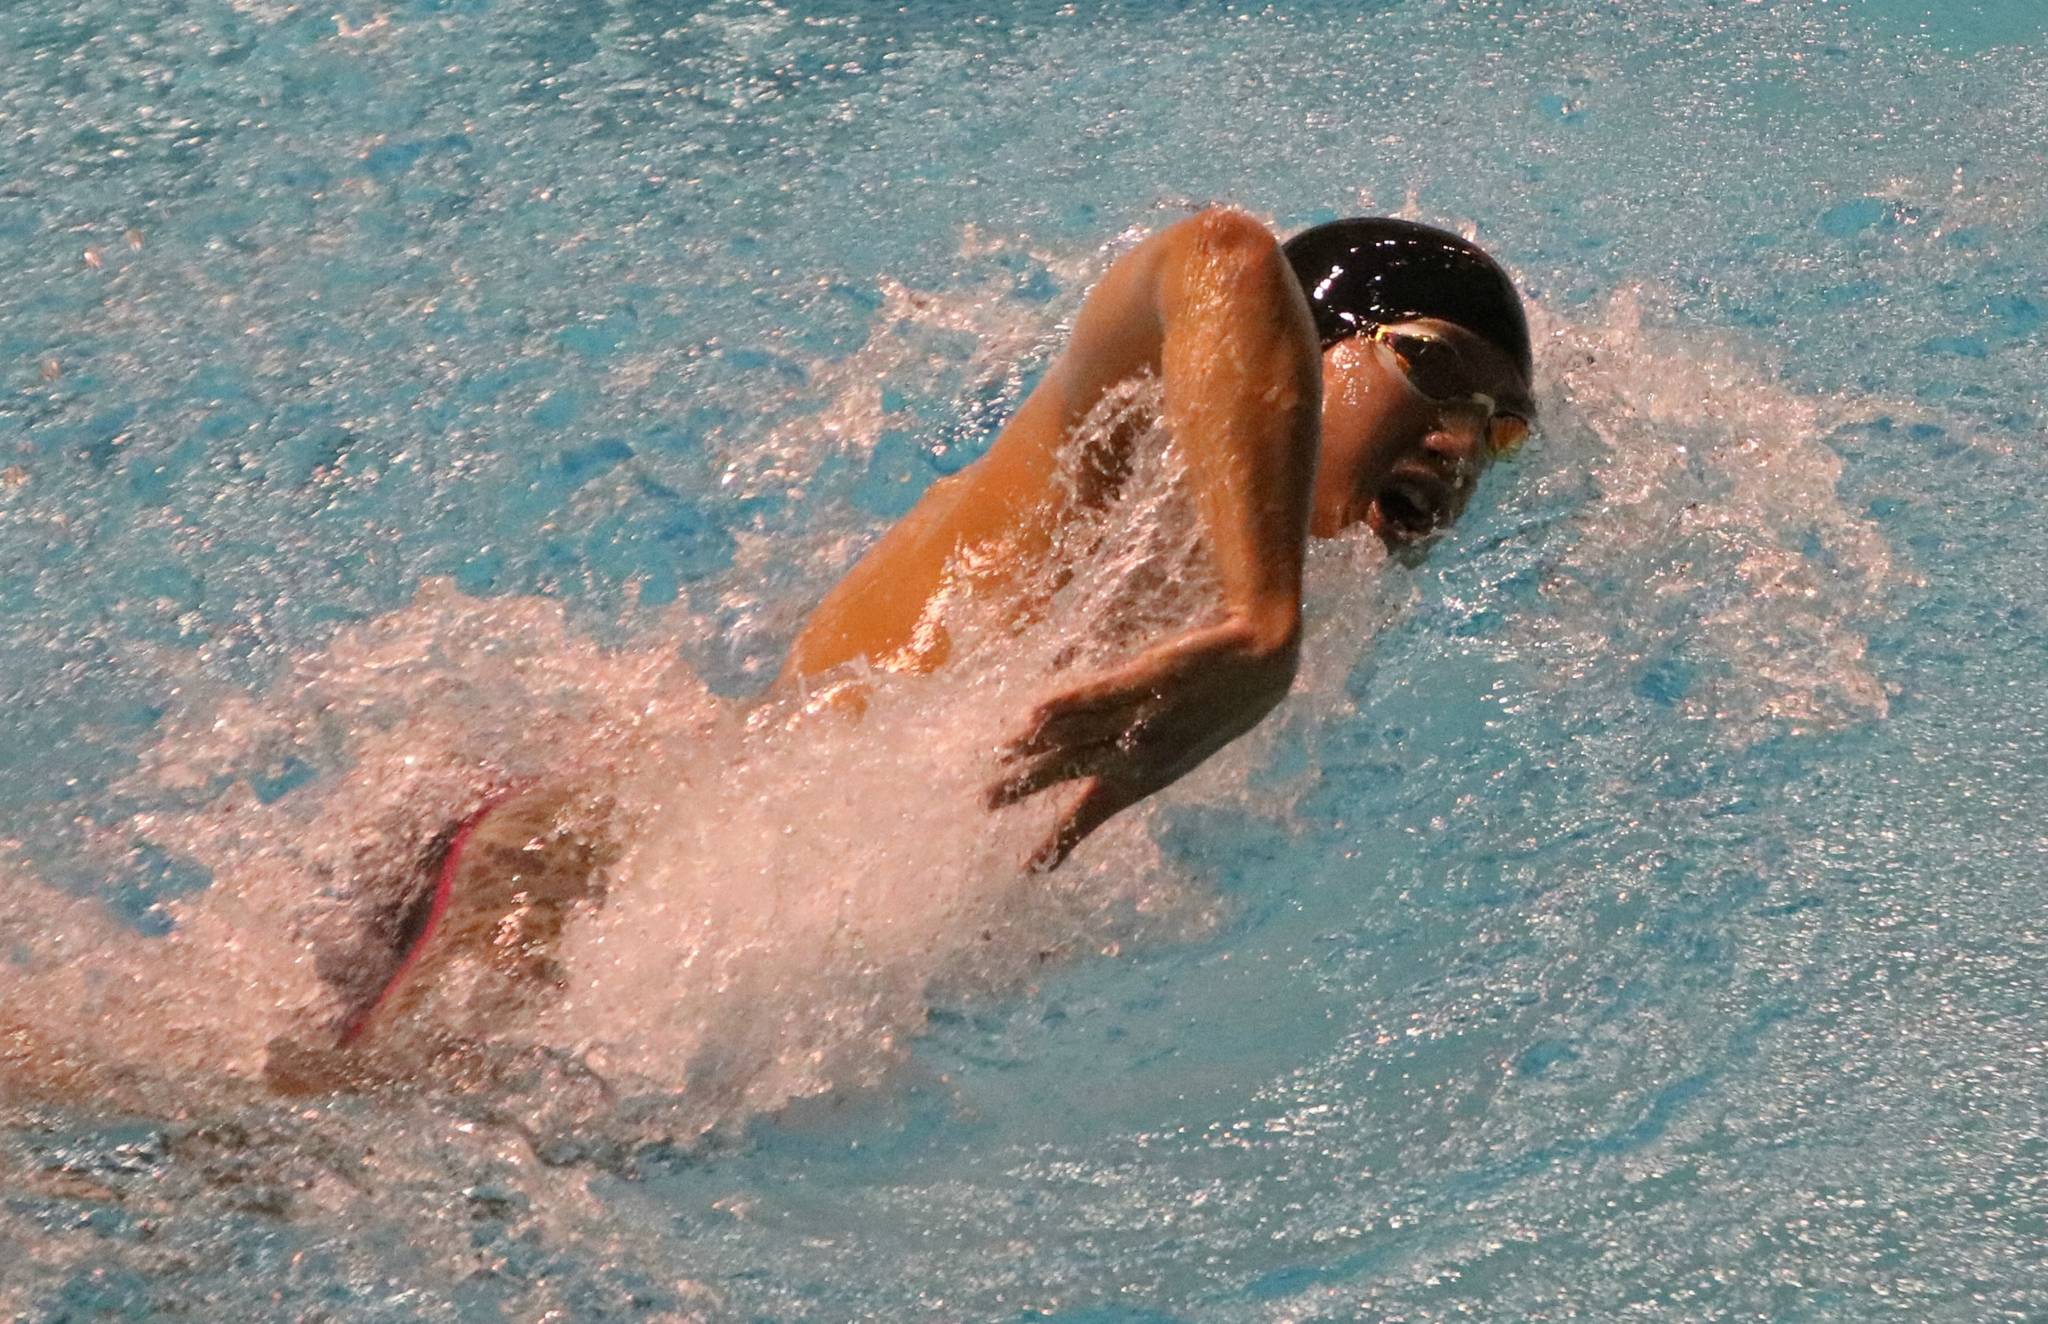 Issaquah’s Christopher Leu rolls through the 200 freestyle B final at state. Andy Nystrom / staff photo